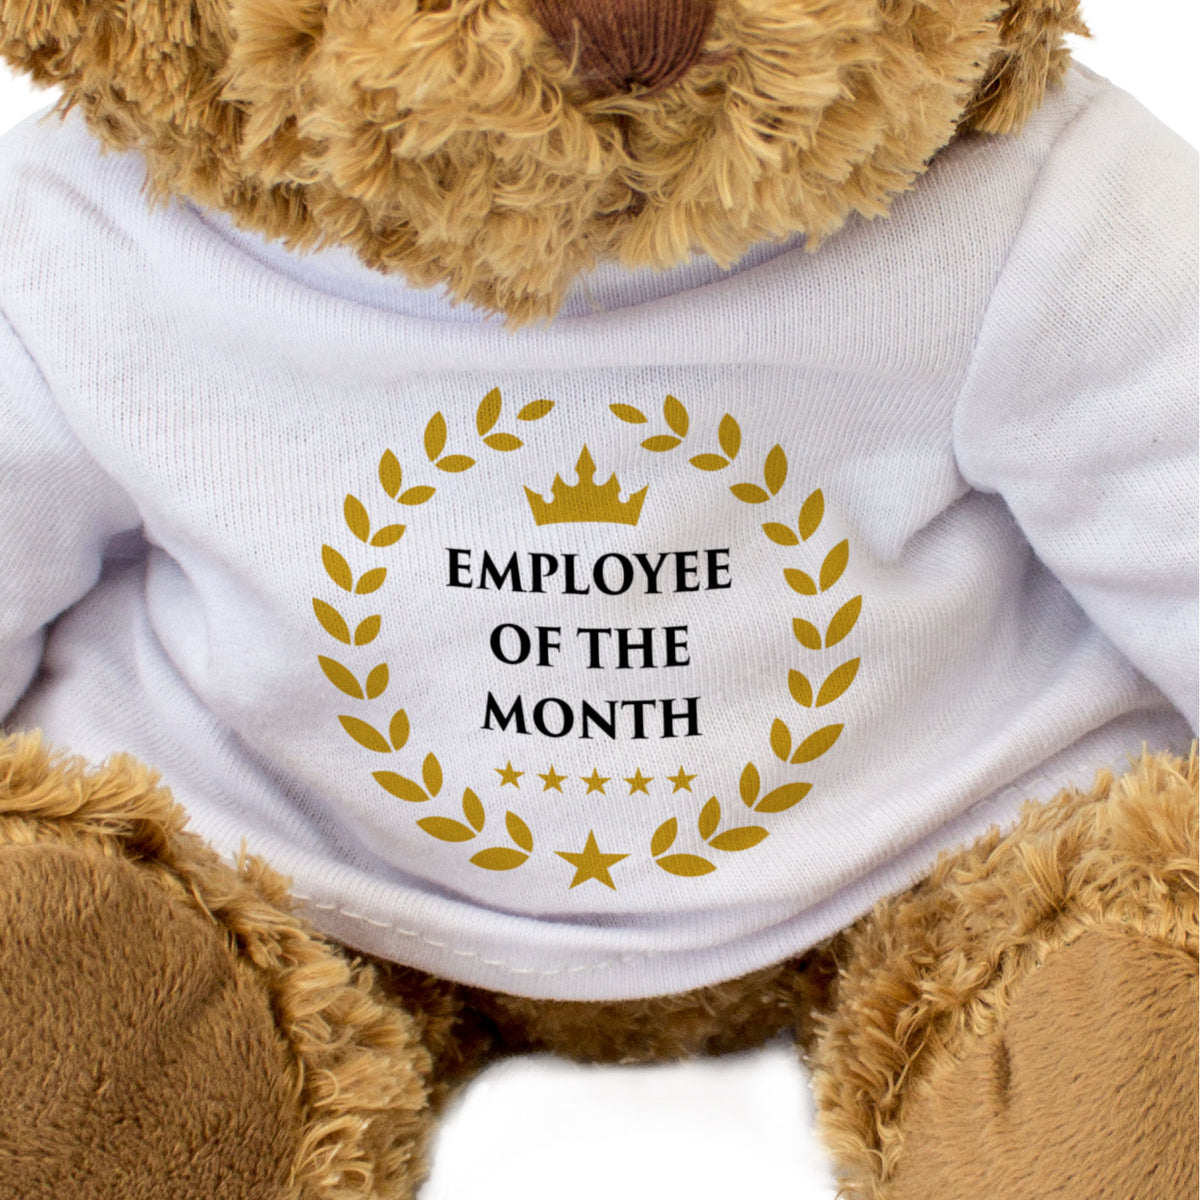 Employee Of The Month - Teddy Bear